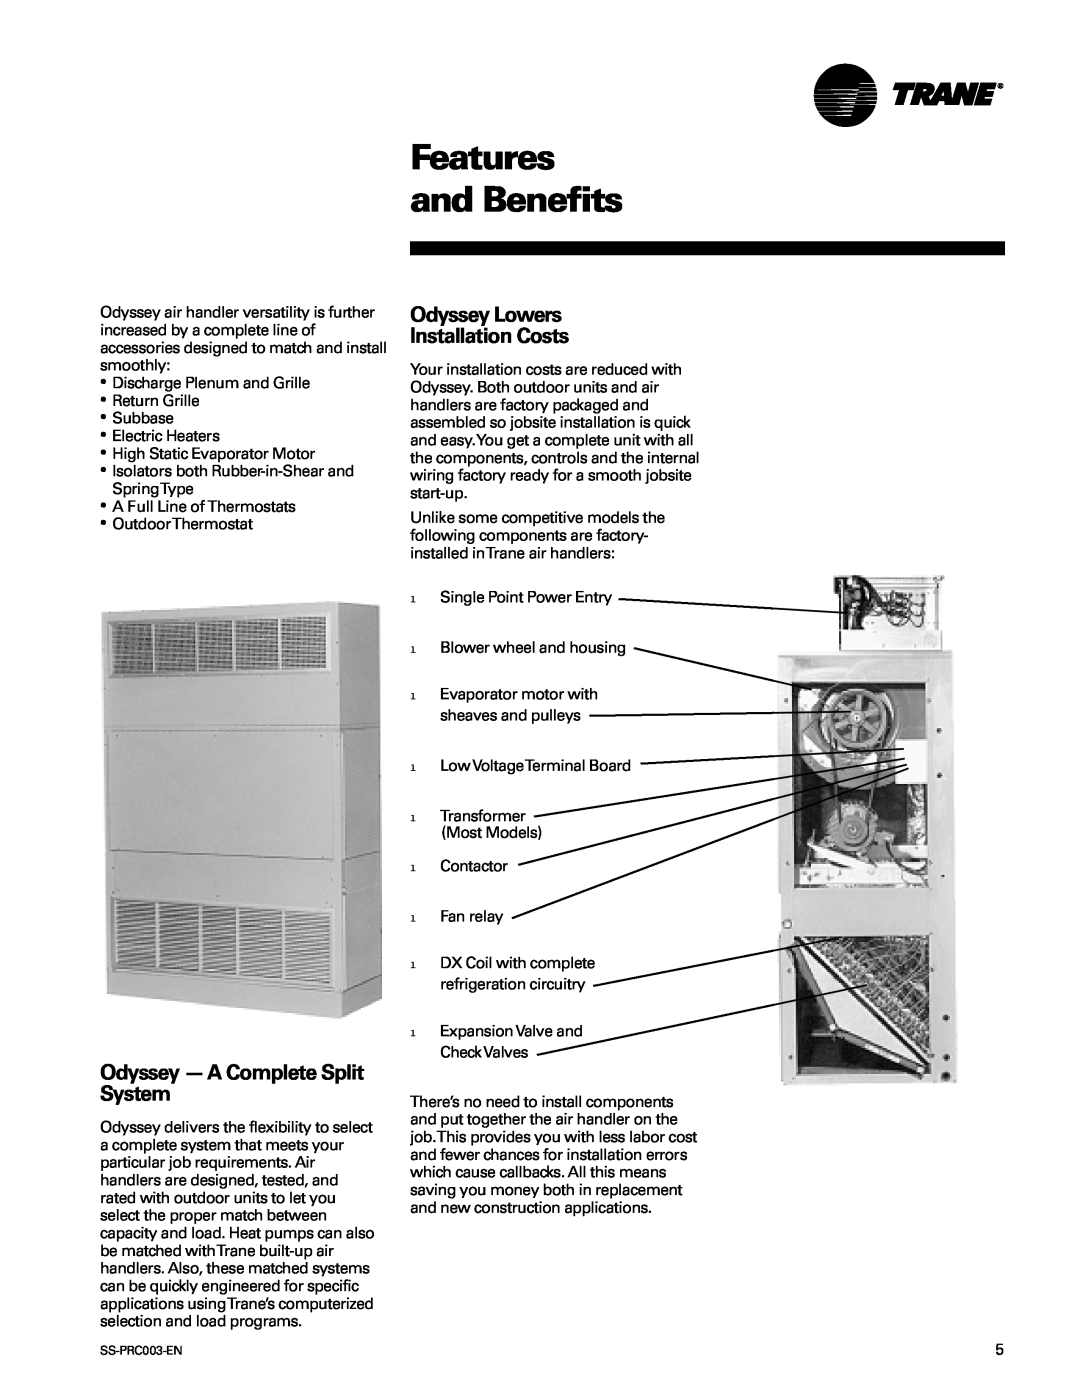 Trane SS-PRC003-EN manual Features and Benefits, Odyssey Lowers Installation Costs, Odyssey -AComplete Split System 